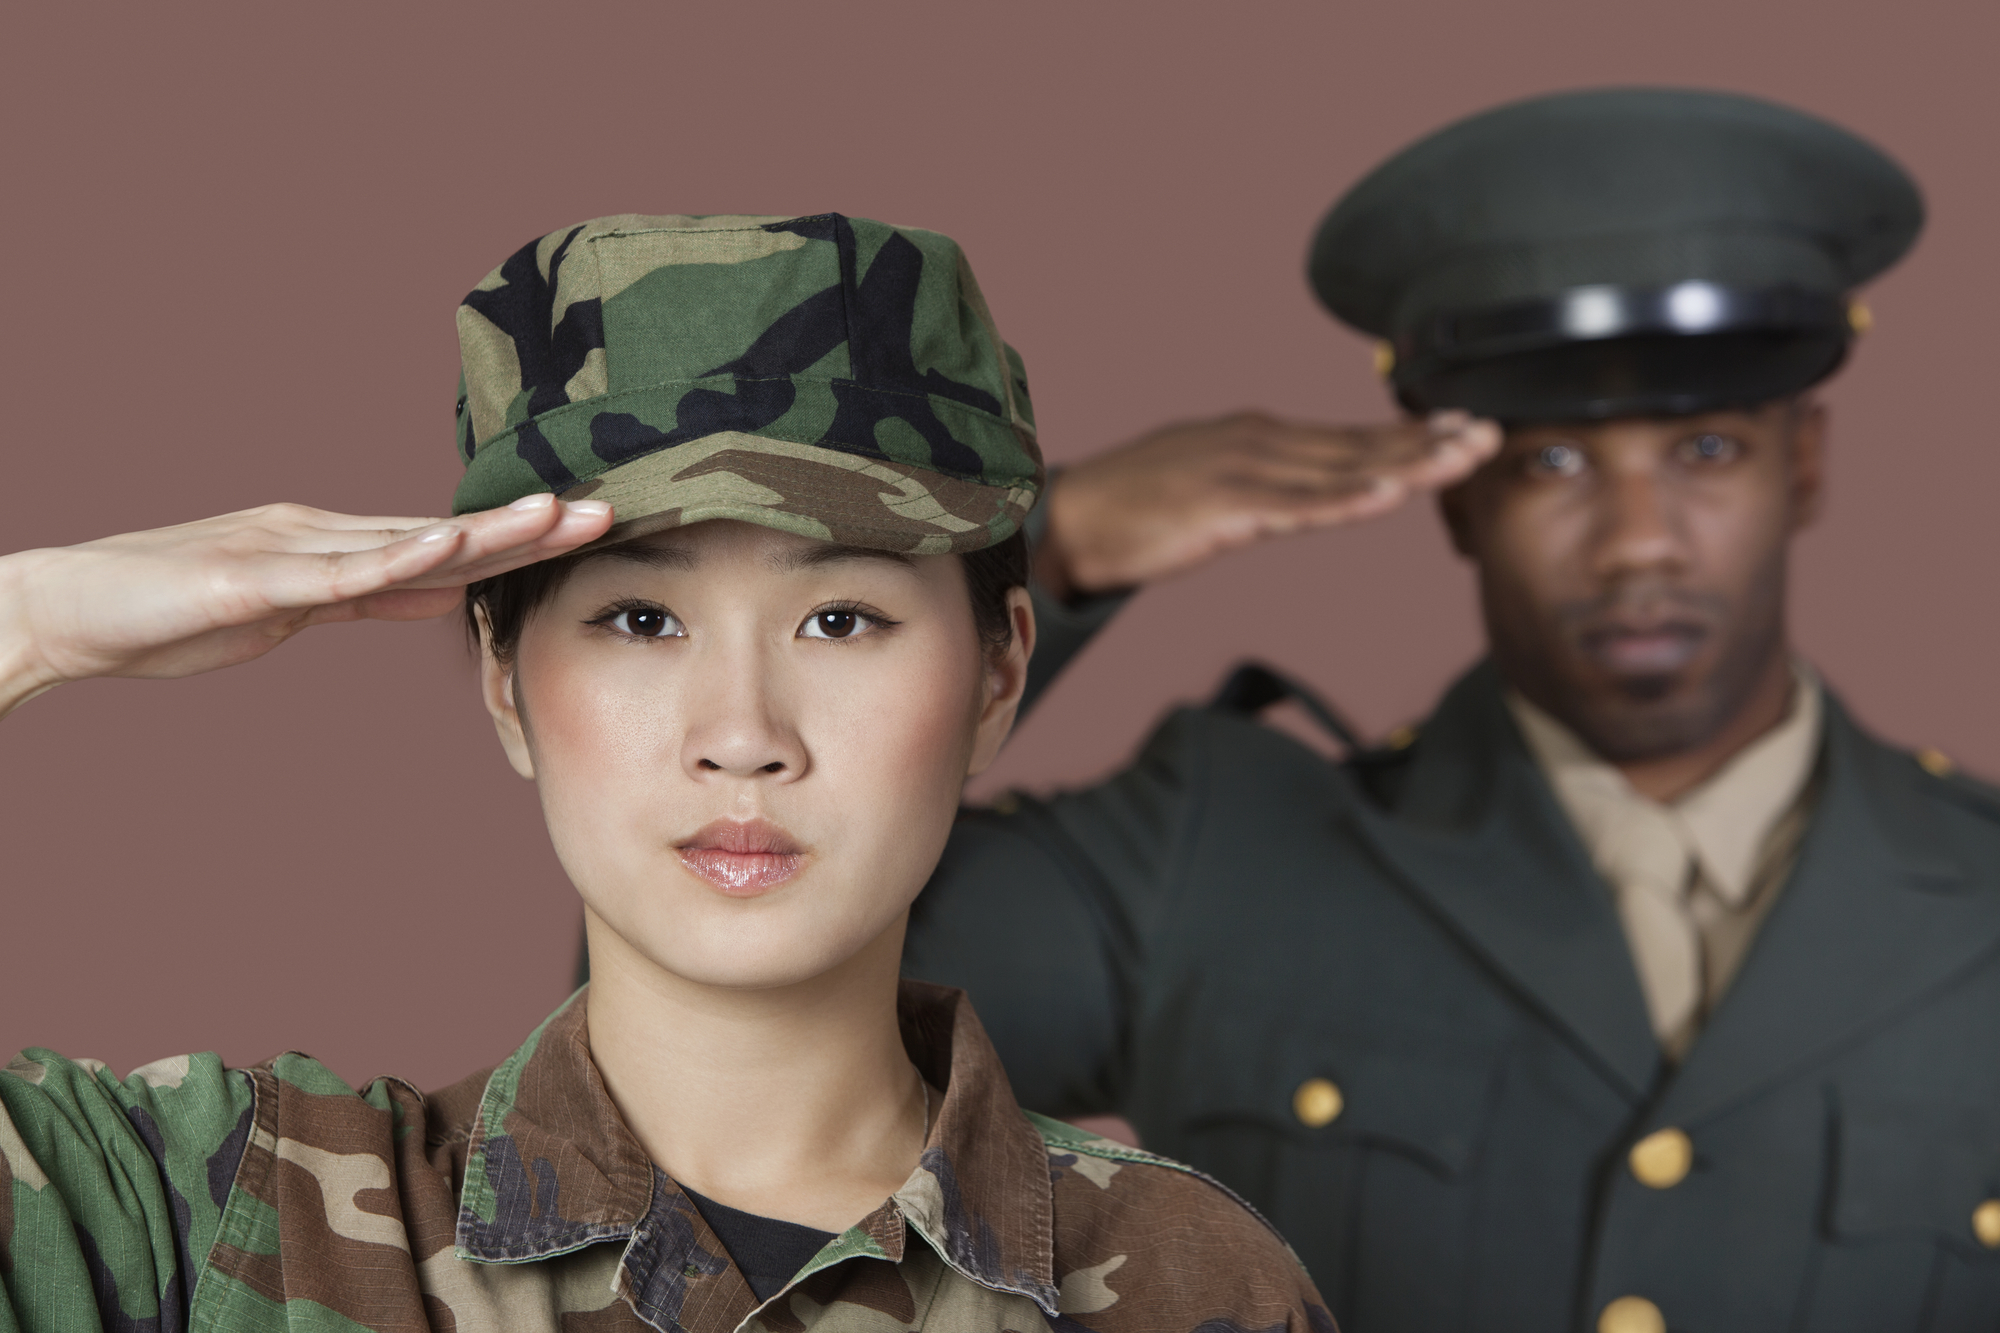 Female Marine Corps soldier and male officer saluting